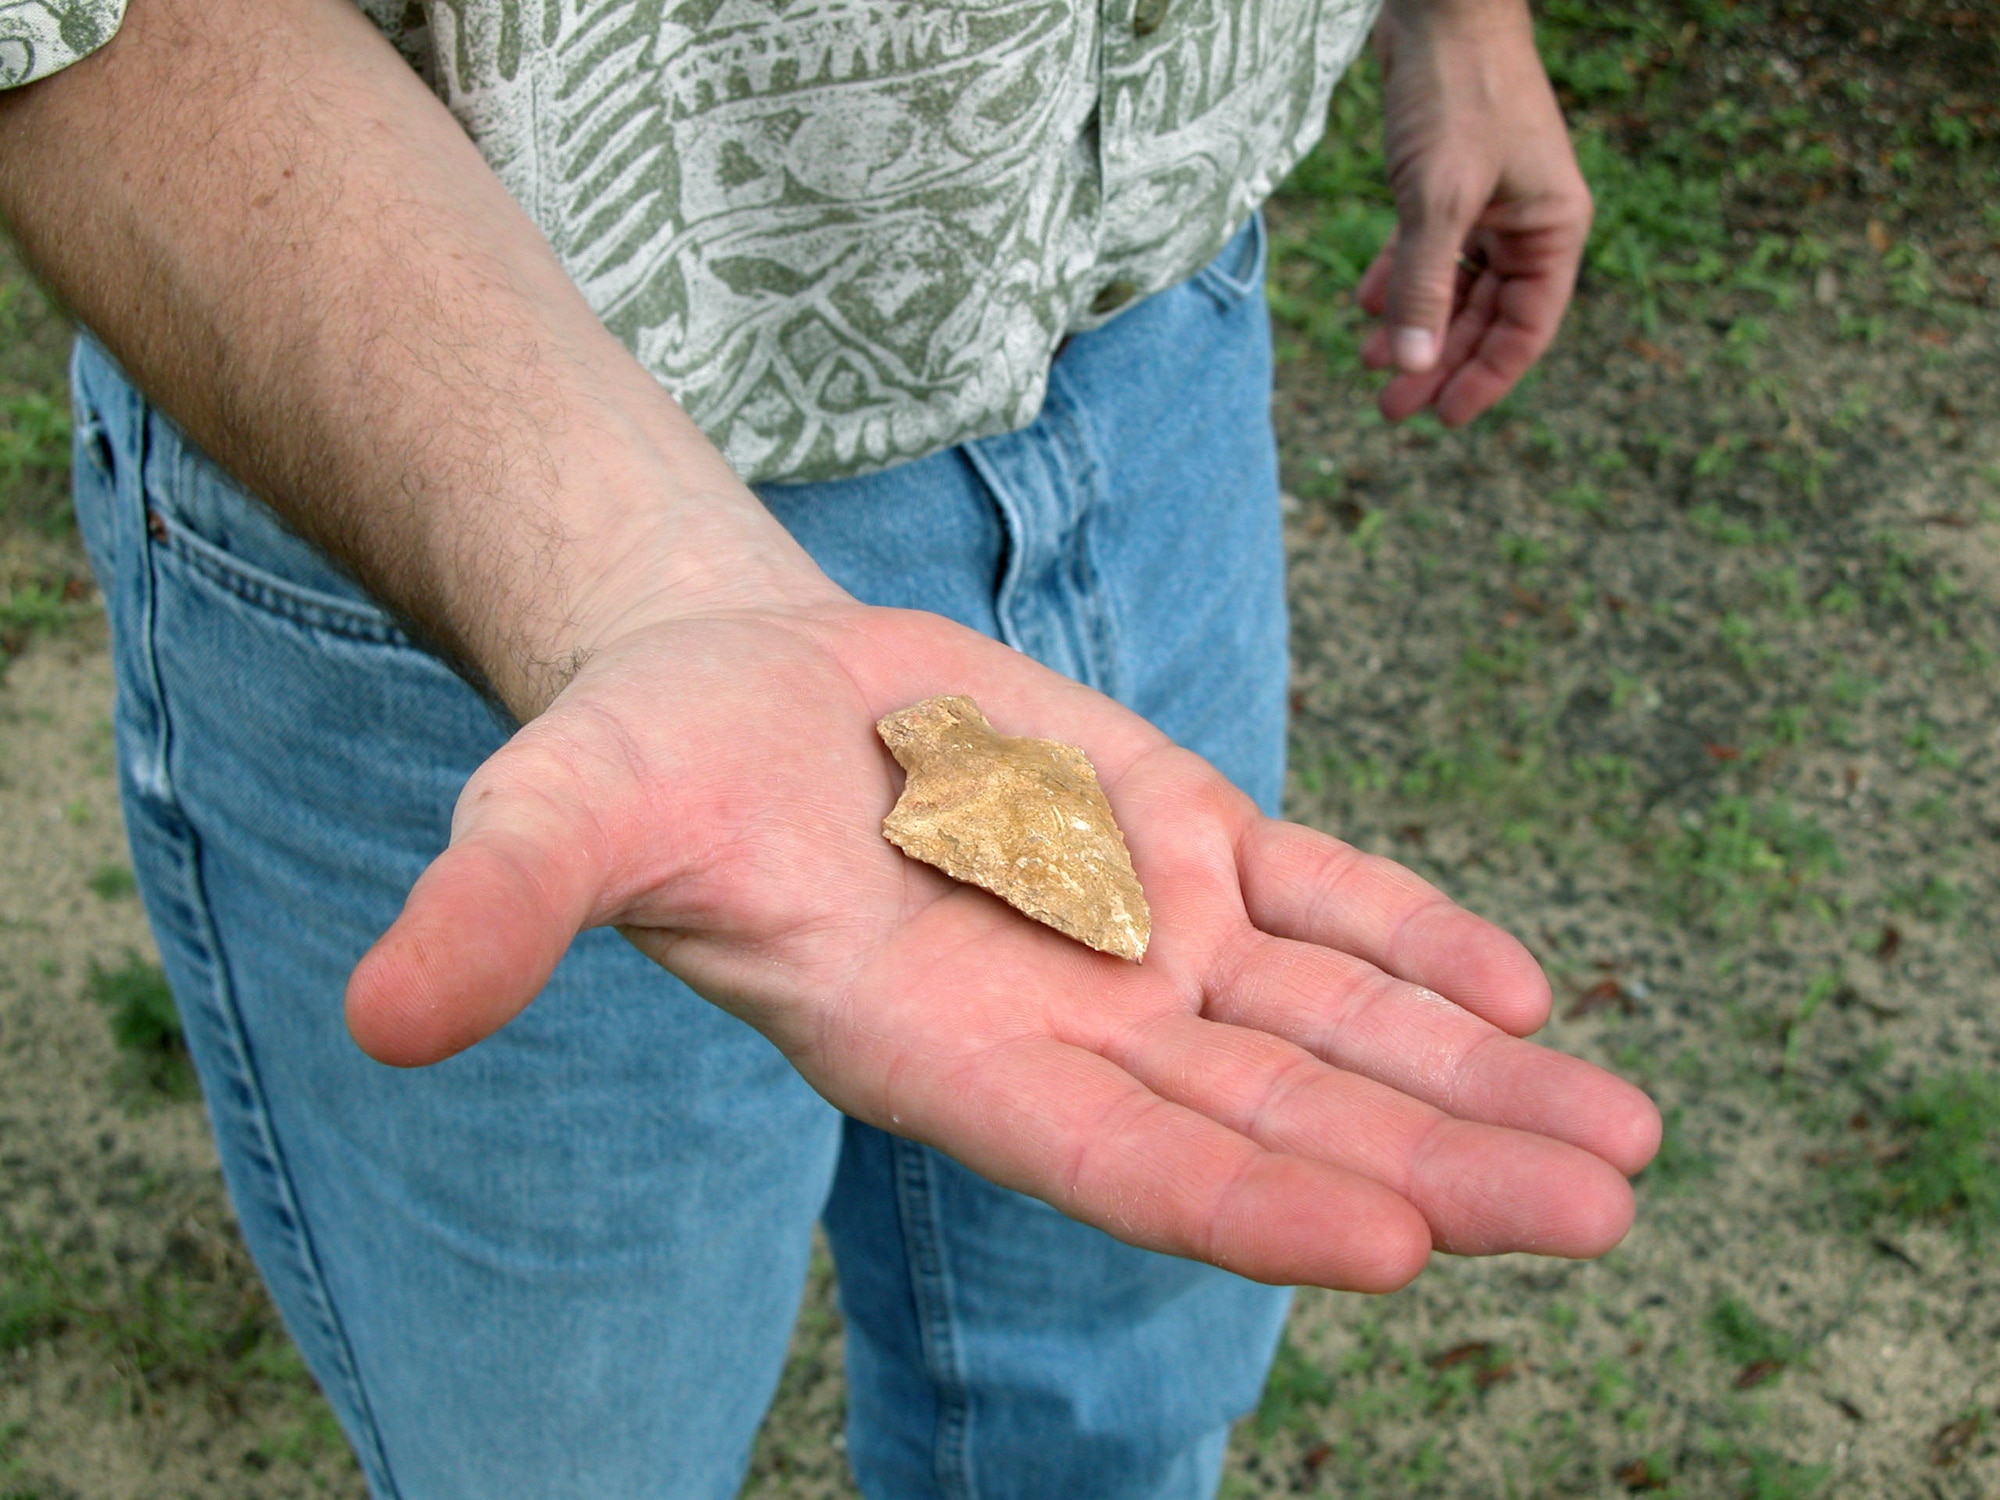 EGLIN AIR FORCE BASE, Eglin -- Mark Stanley displays the American Indian arrowhead found by 6-year-old John David Lilley.  The arrowhead, which dates back to 3,000 to 2,000 B.C., was probably used by descendants of the 18th or 19th century Creeks or Seminoles.  Mr. Stanley is an archaeologist with the environmental program directorate.  (U.S. Air Force photo by Sarah McCaffrey)